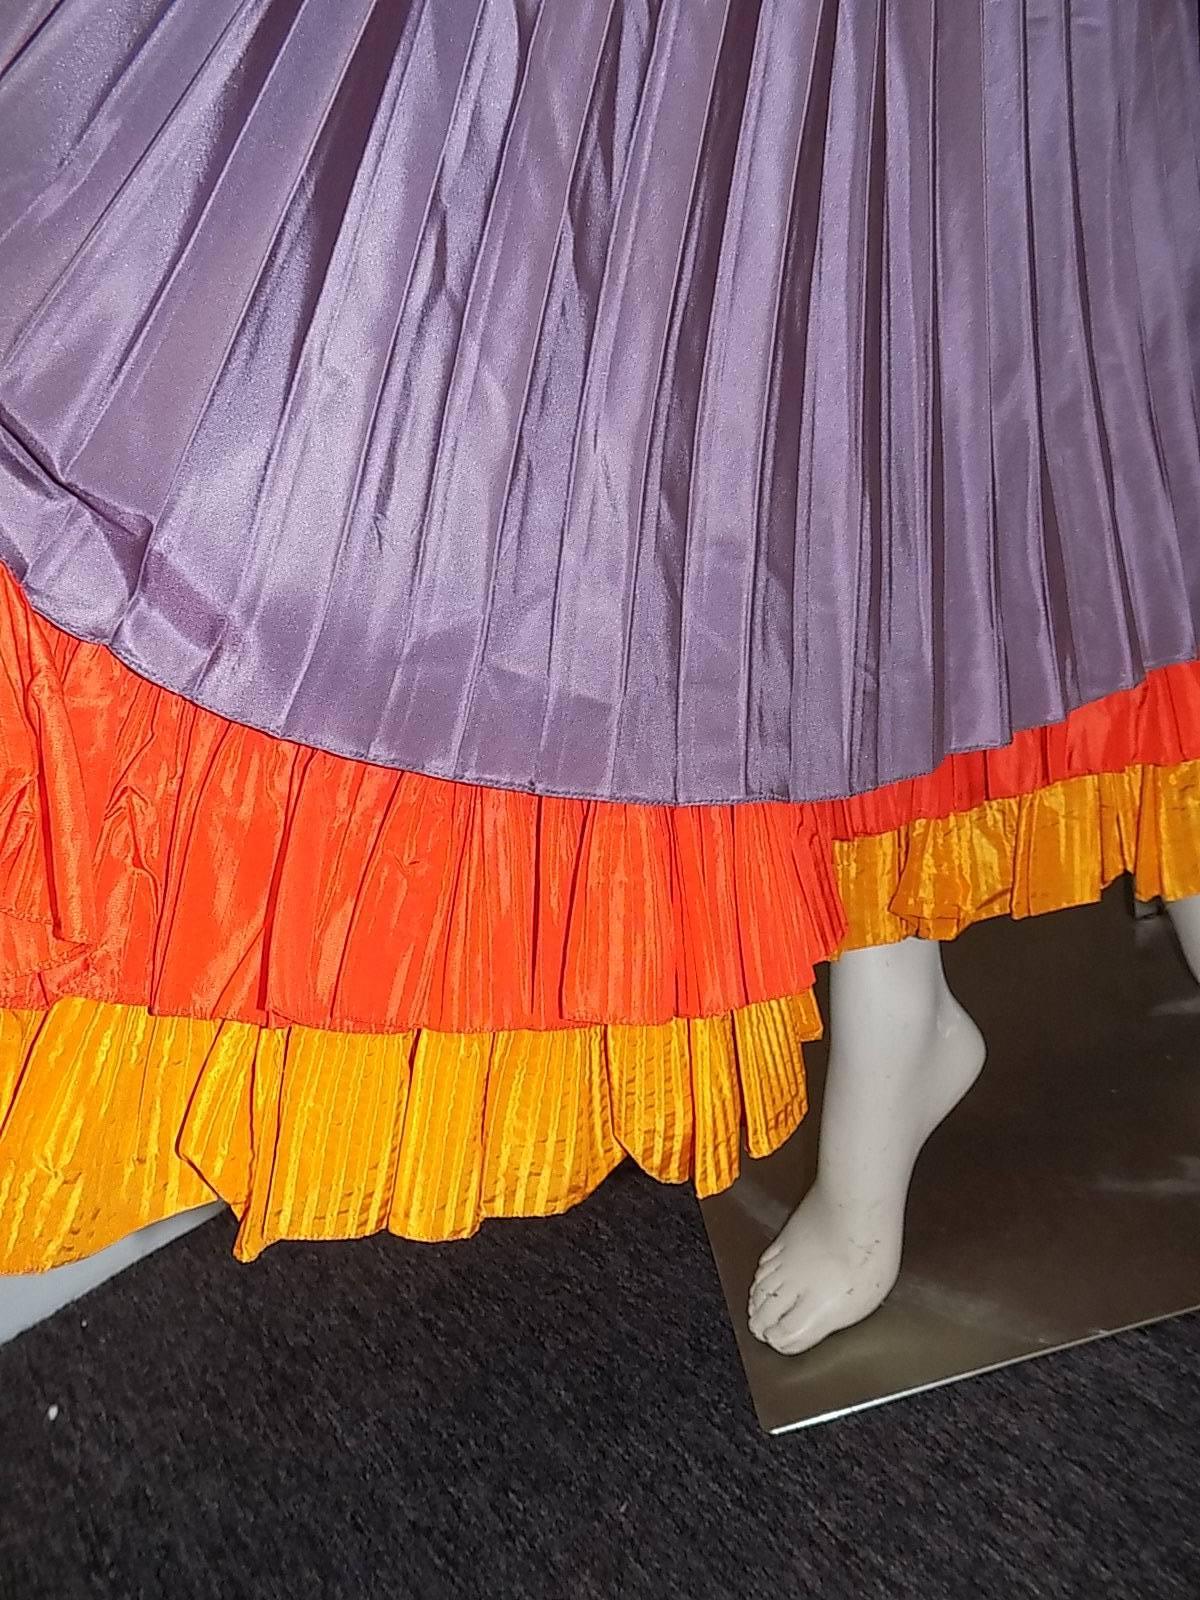 Super spectacular vintage Oscar  de la Renta   long  pleated  skirt with embroidered belt.   Silk taffeta  in lilac color  featuring two cascading yellow and orange layers of ruffles. Spanish   influence in design. Yellow embroidered wide belt with